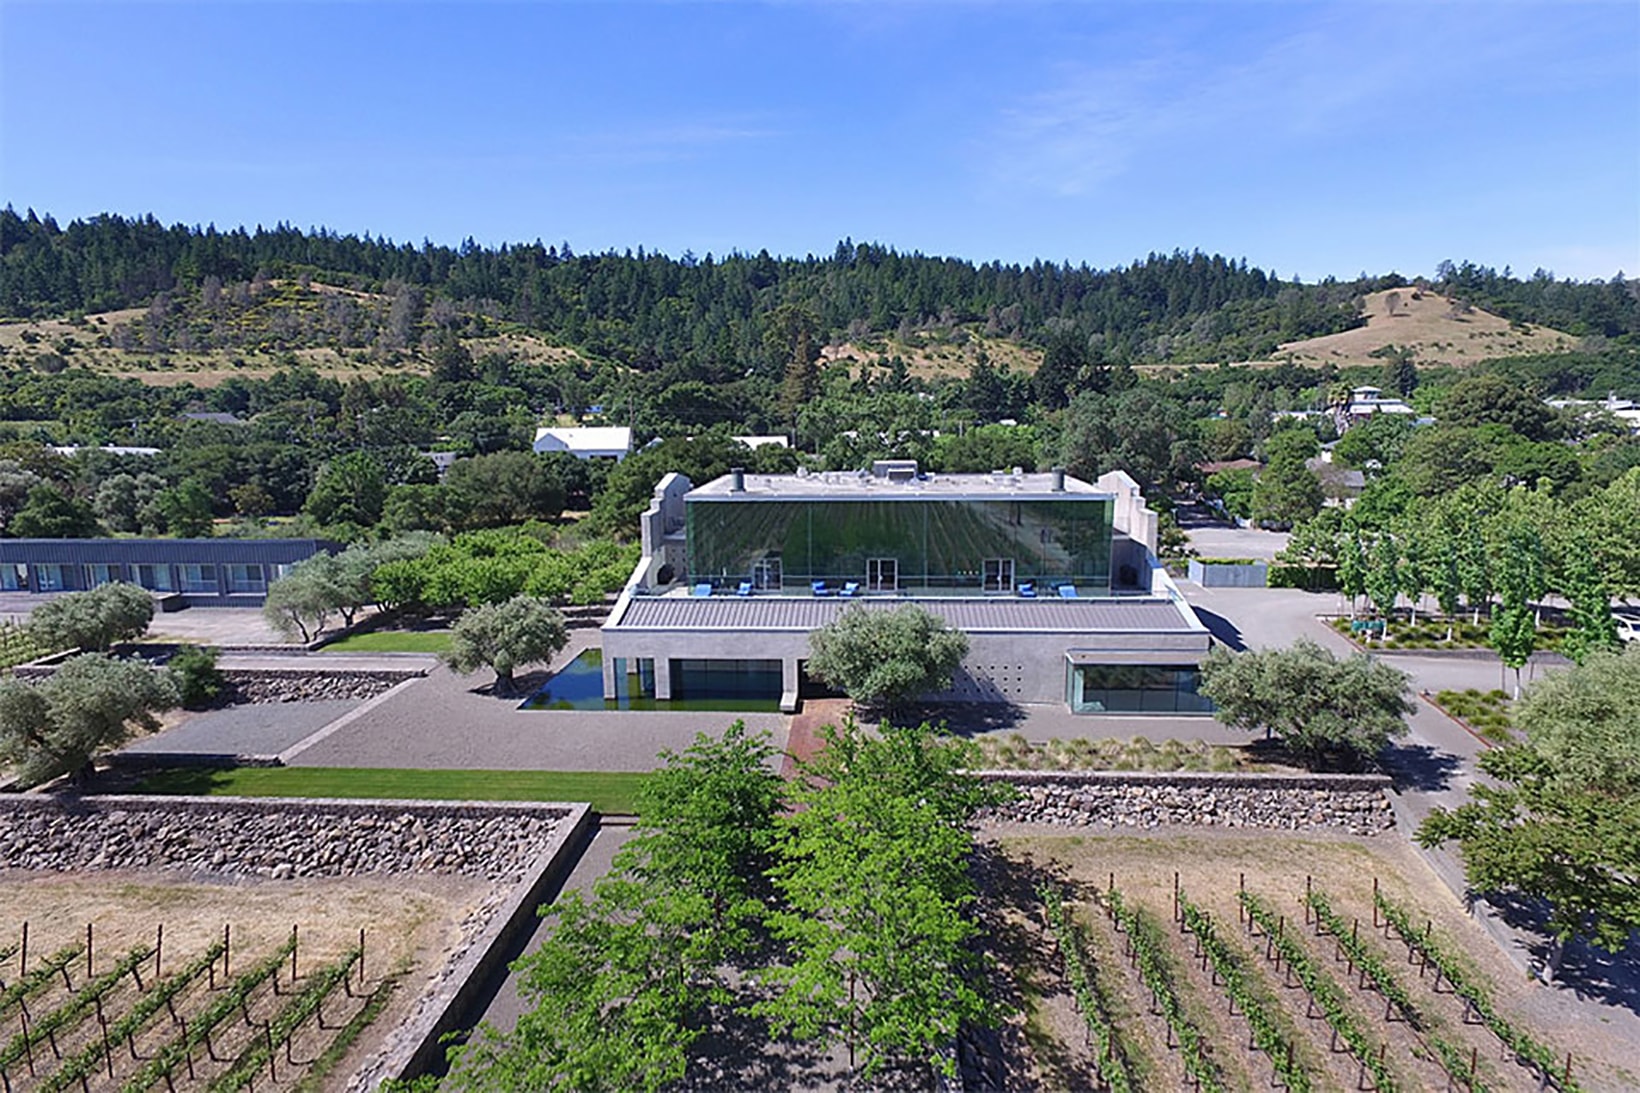 Geyserville Vineyard Home House Industrial Architecture California Buildings